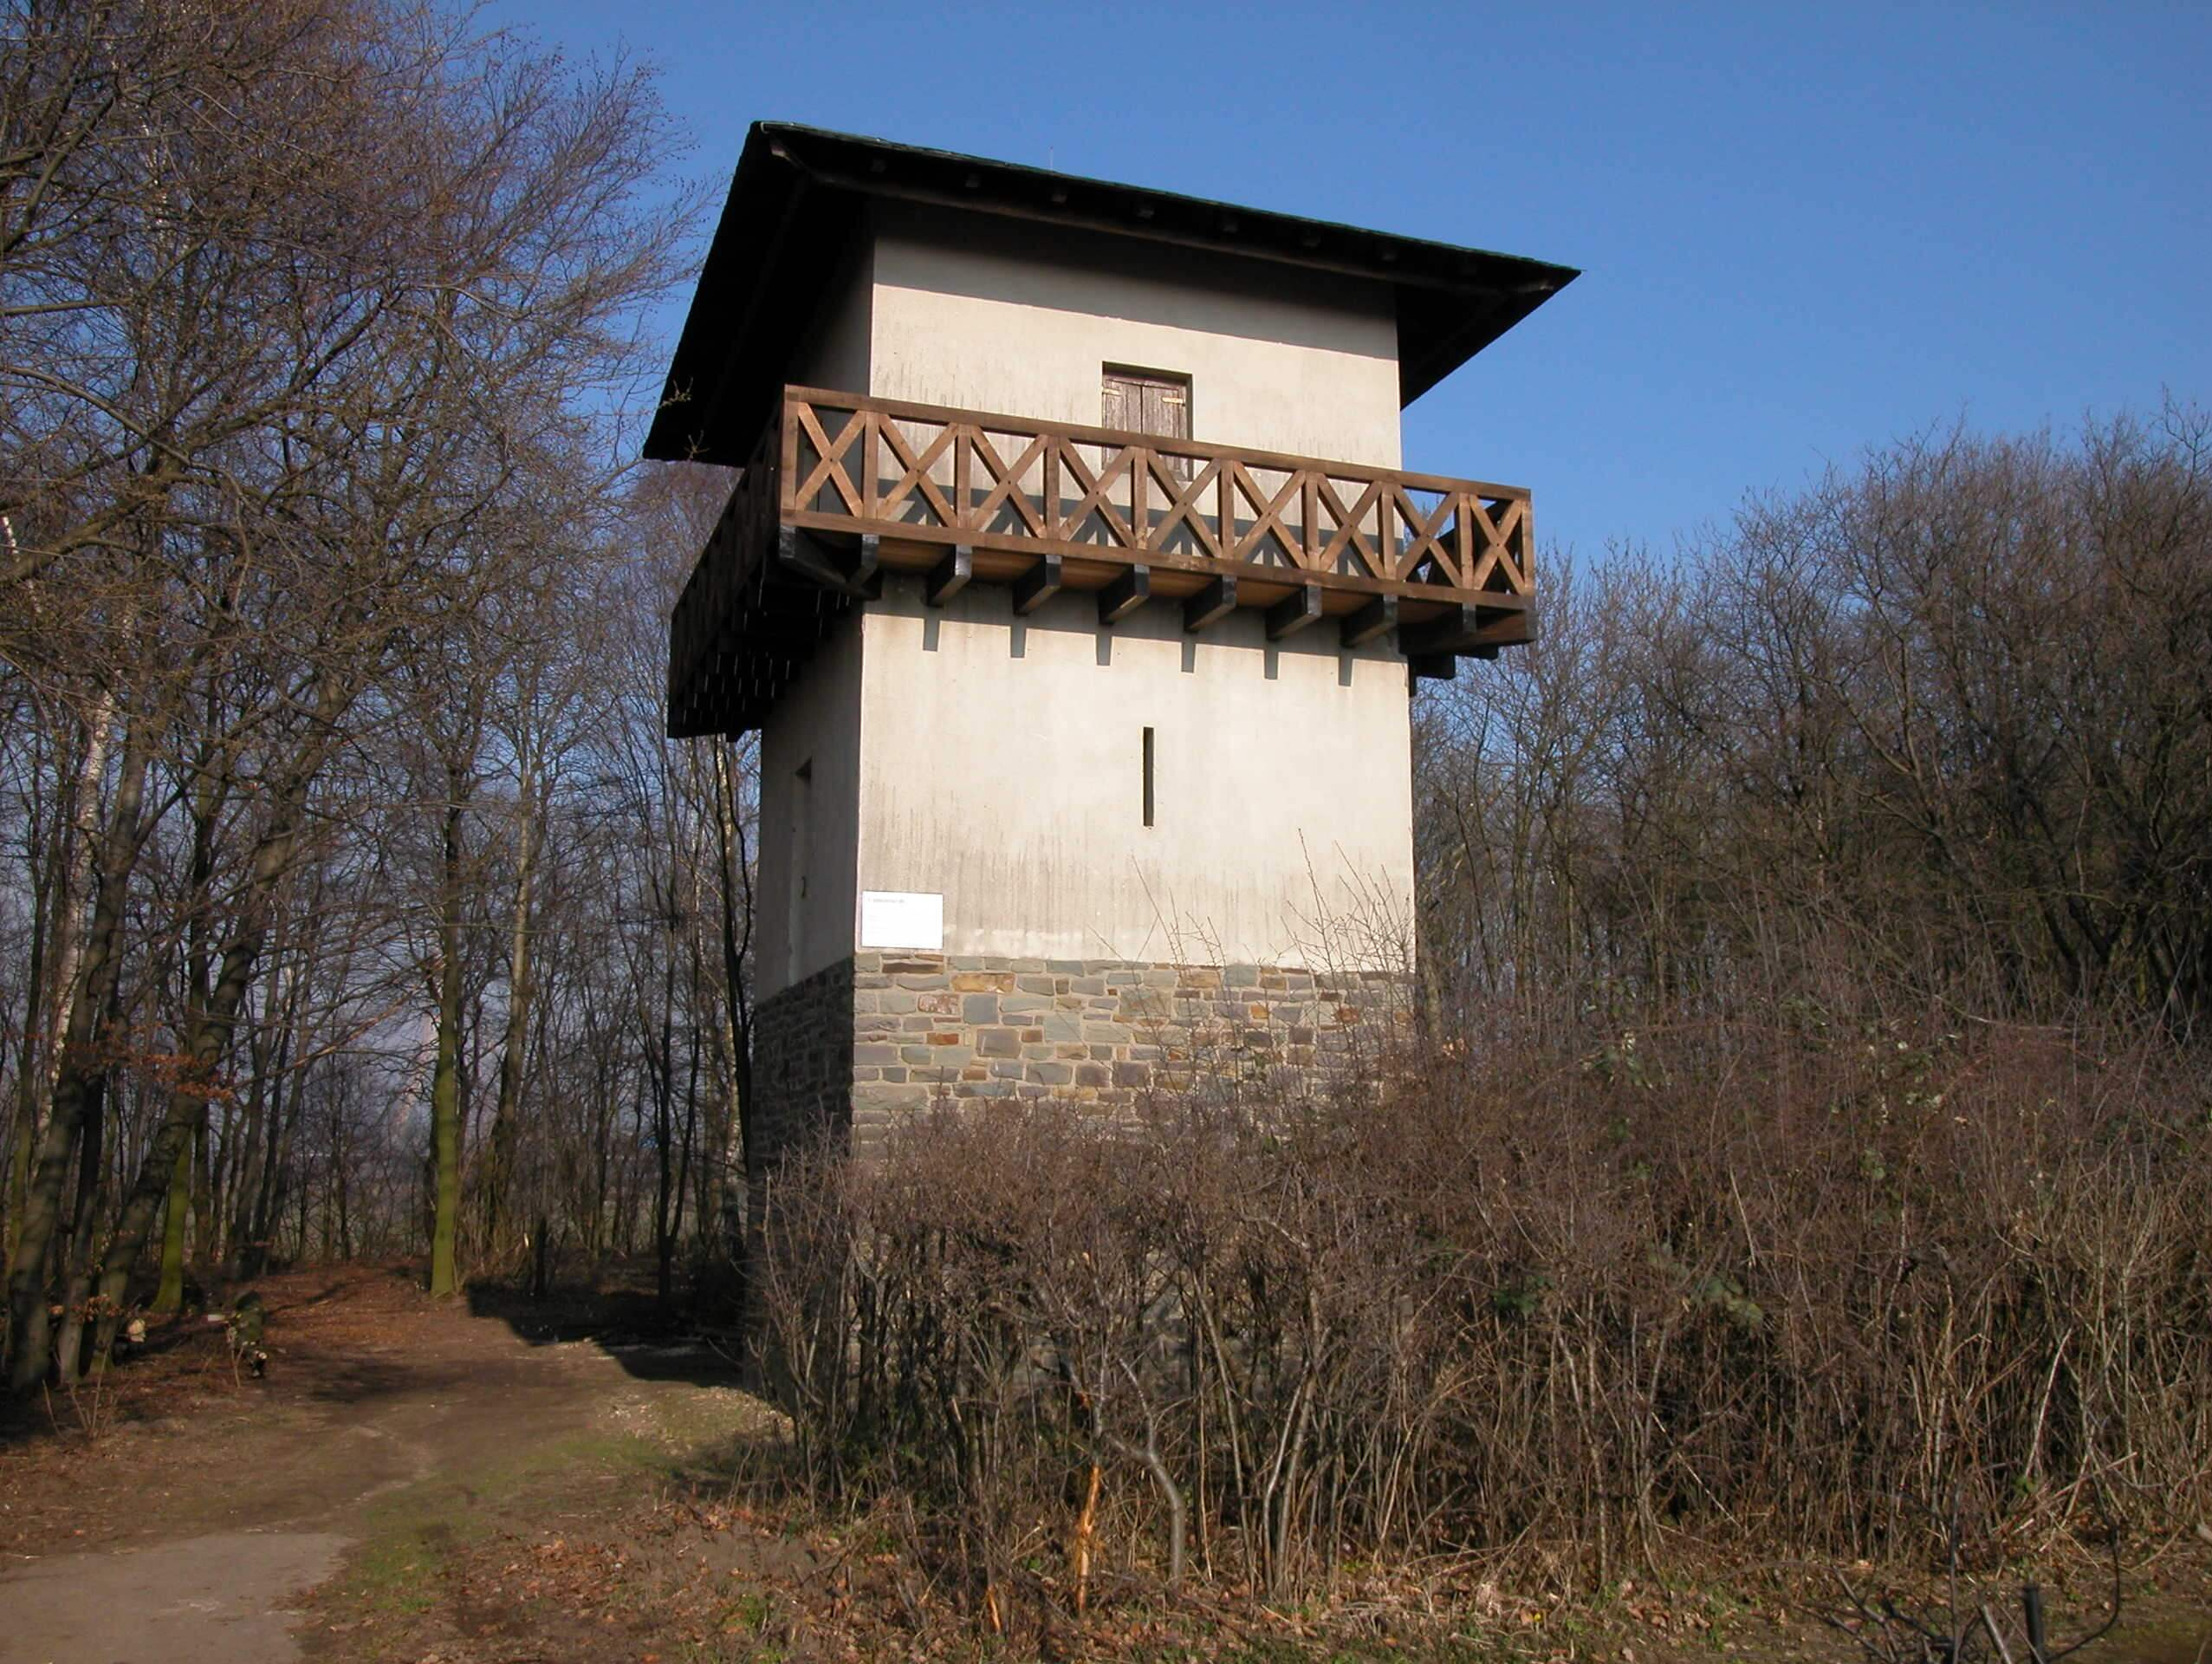 A photo of the reconstructed Roman watchtower in Neuss-Reckberg